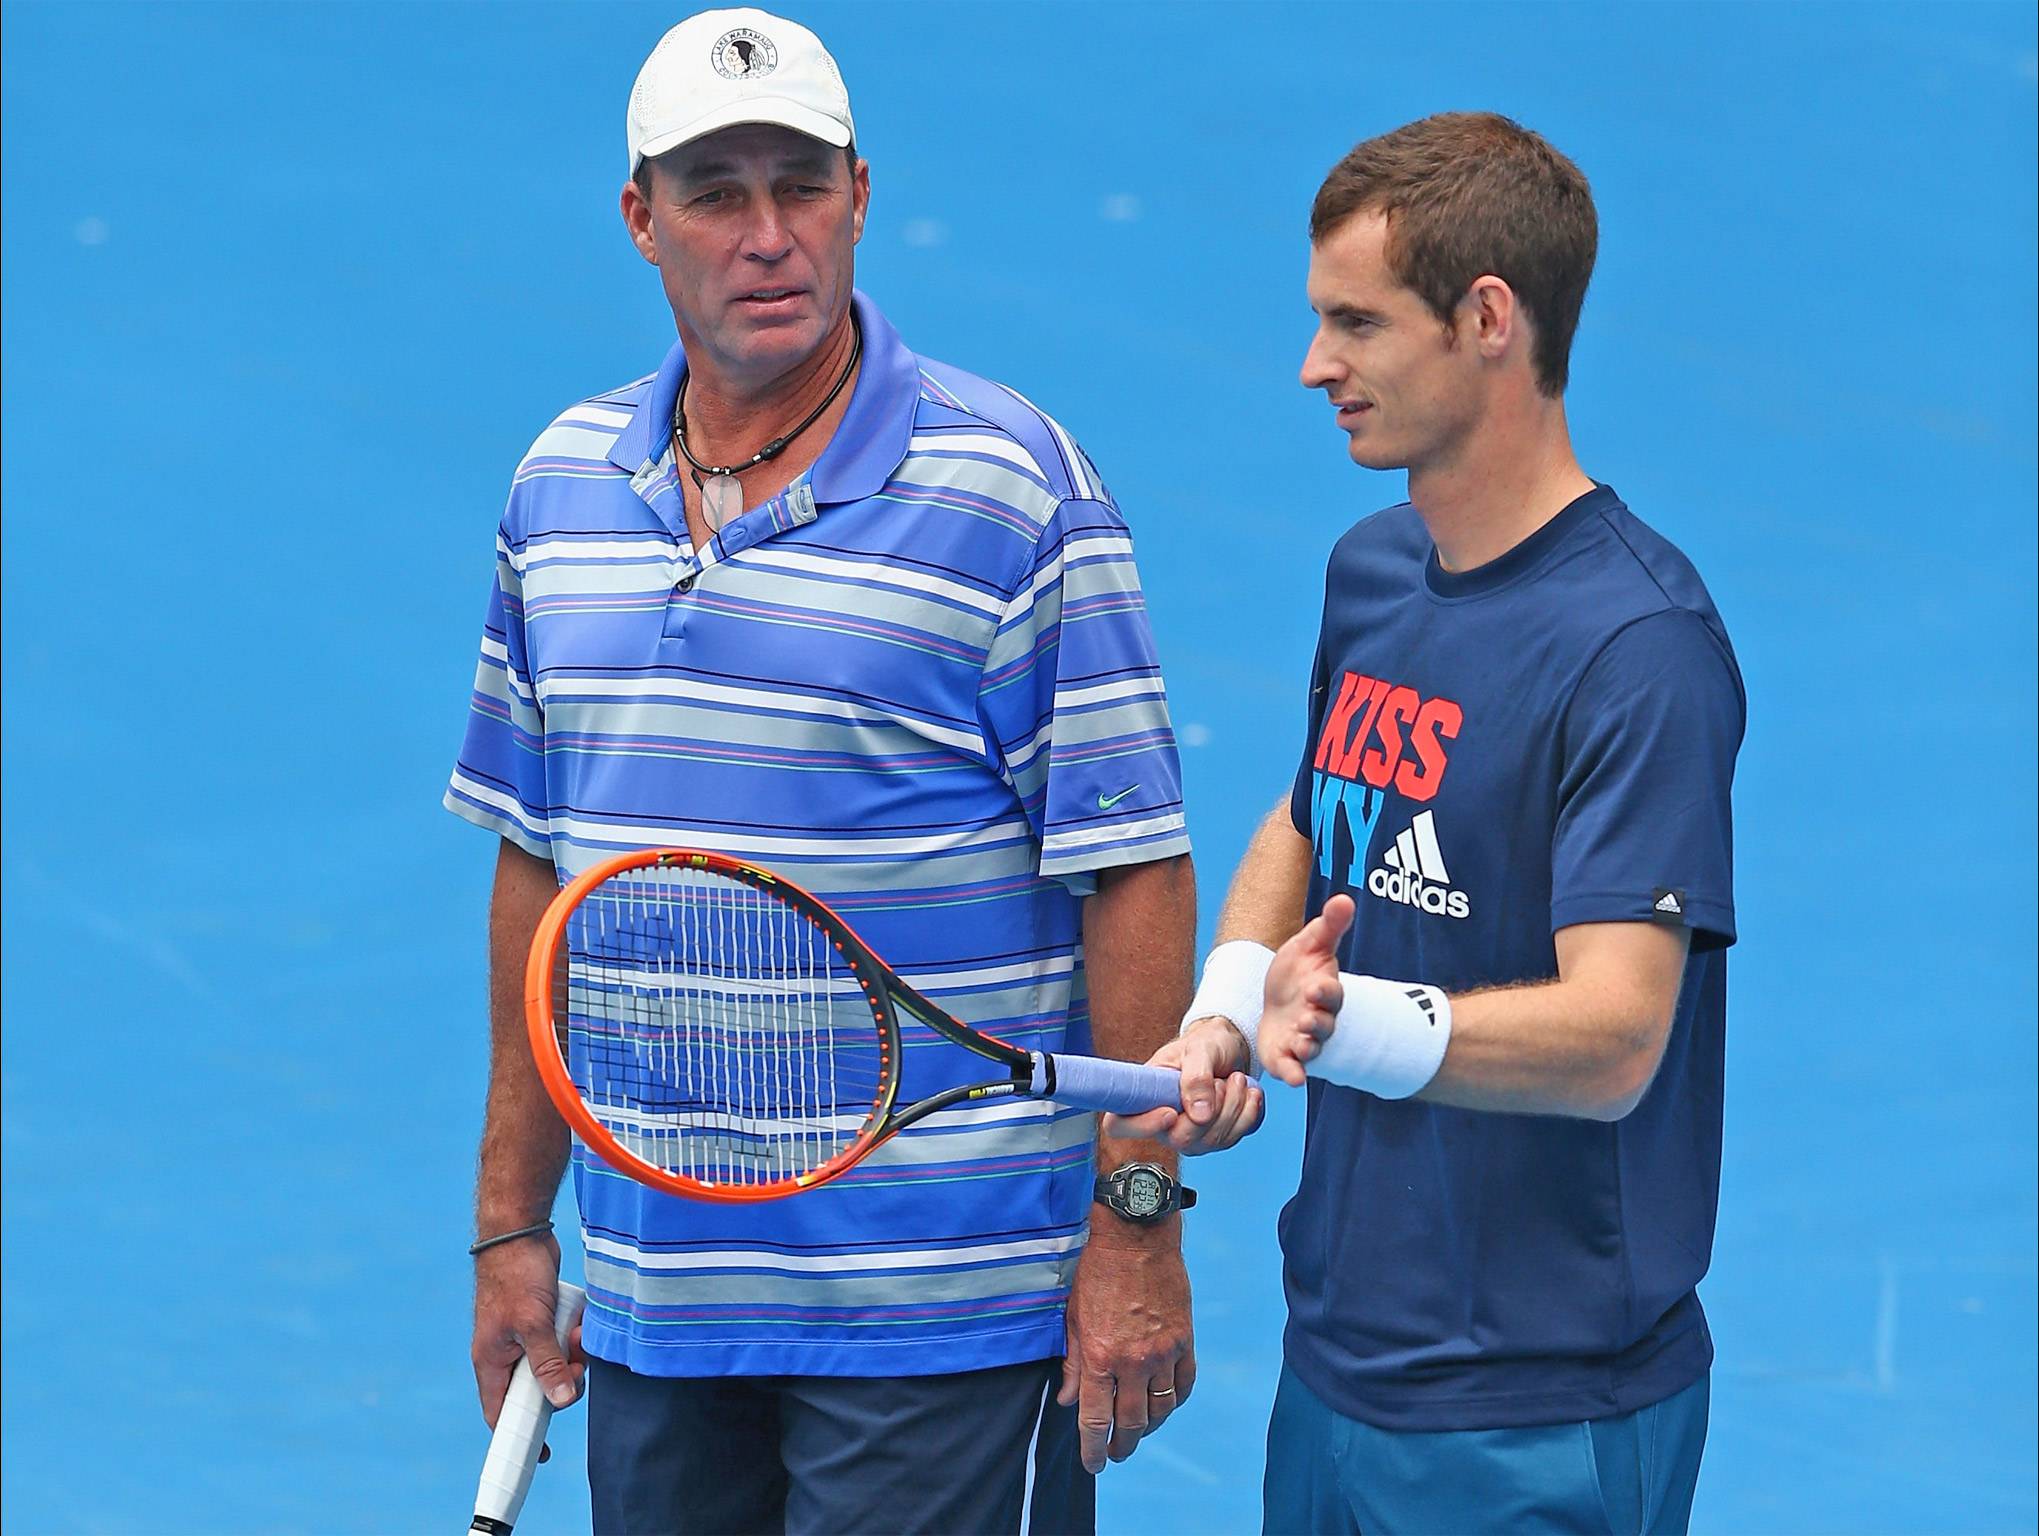 Andy Murray and Ivan Lendl confer during practice before this year’s Australian Open